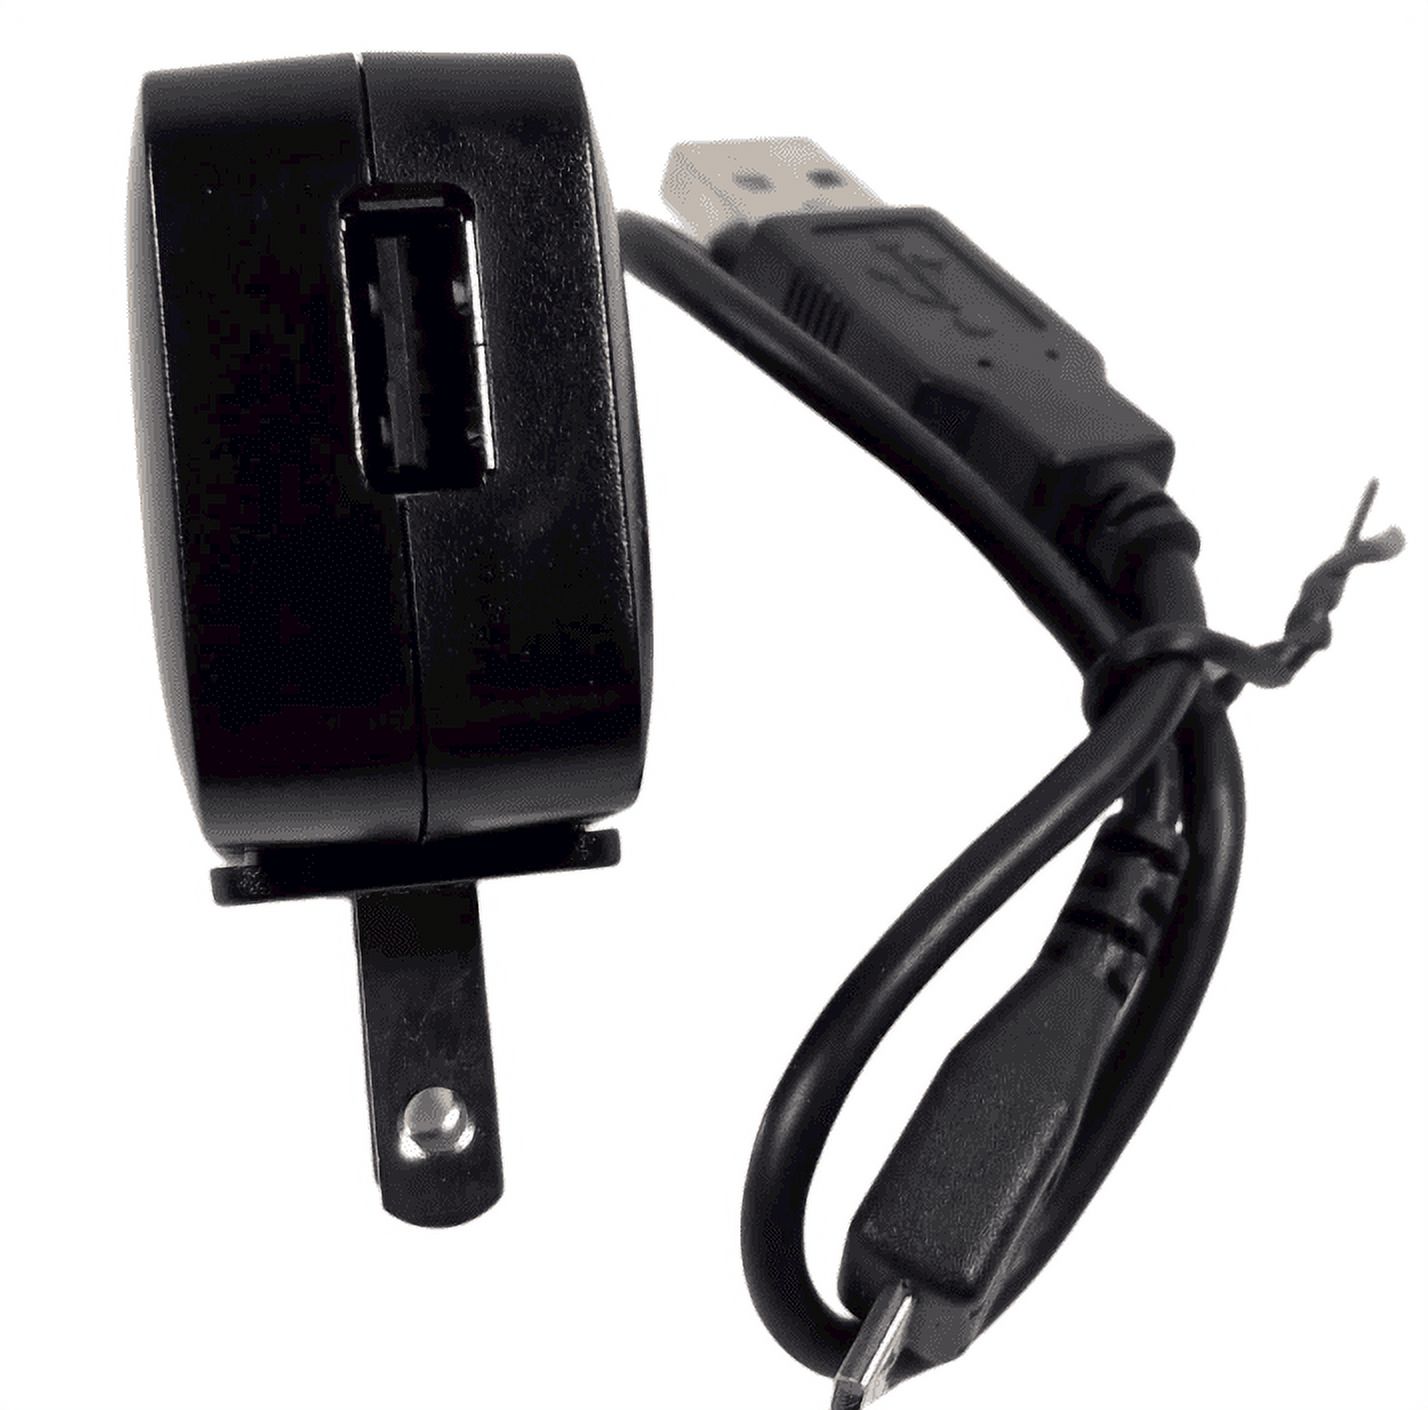 Plantronics SSC-4W5 050075 5.0V 750mA AC Power Adapter Charger 200733-01 - image 4 of 5